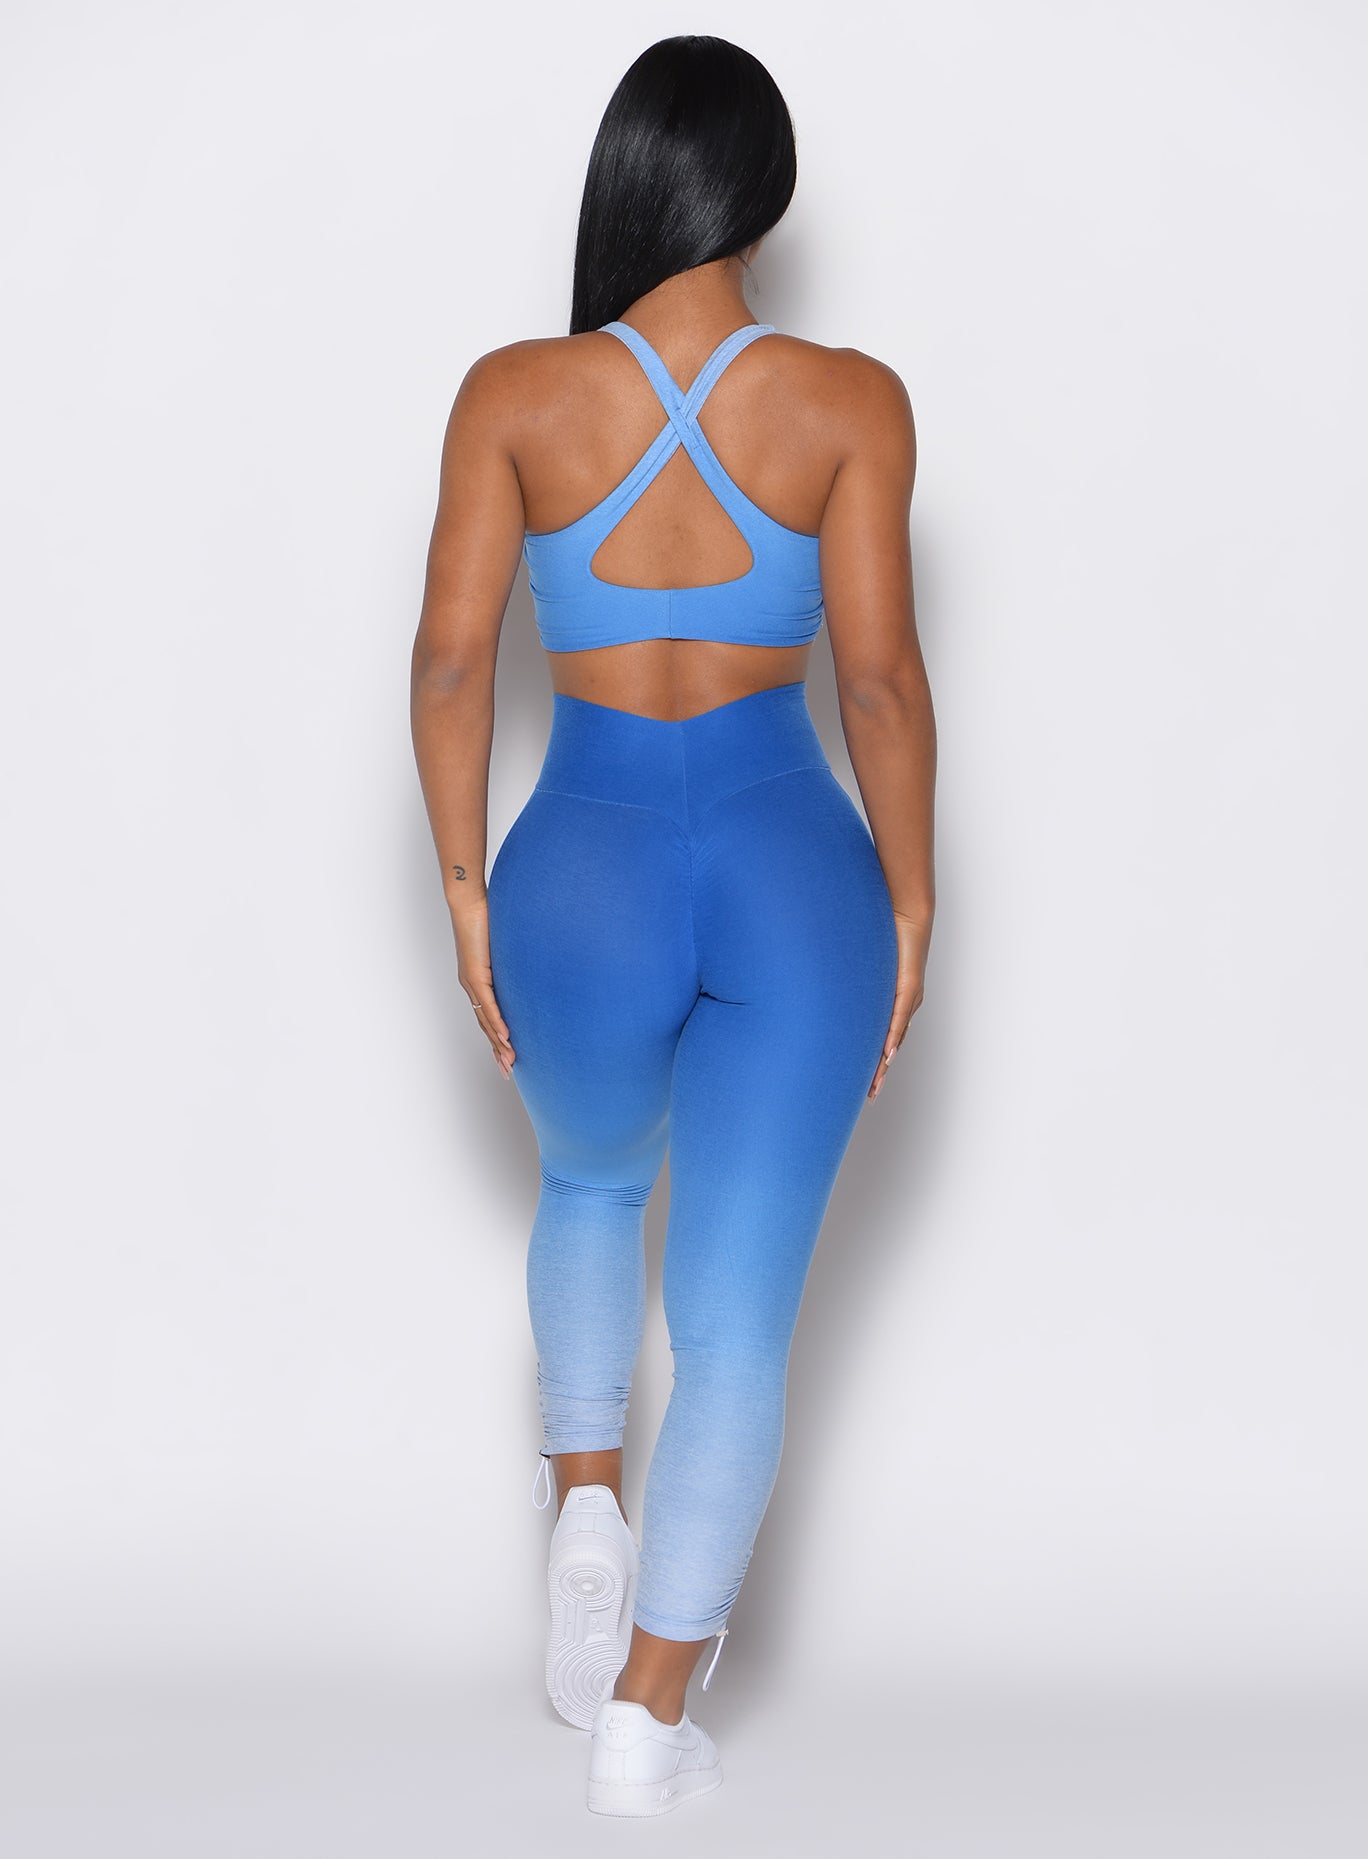 back profile view of a model wearing our toggle leggings in Ombre Blue Crush color along with the matching sports bra